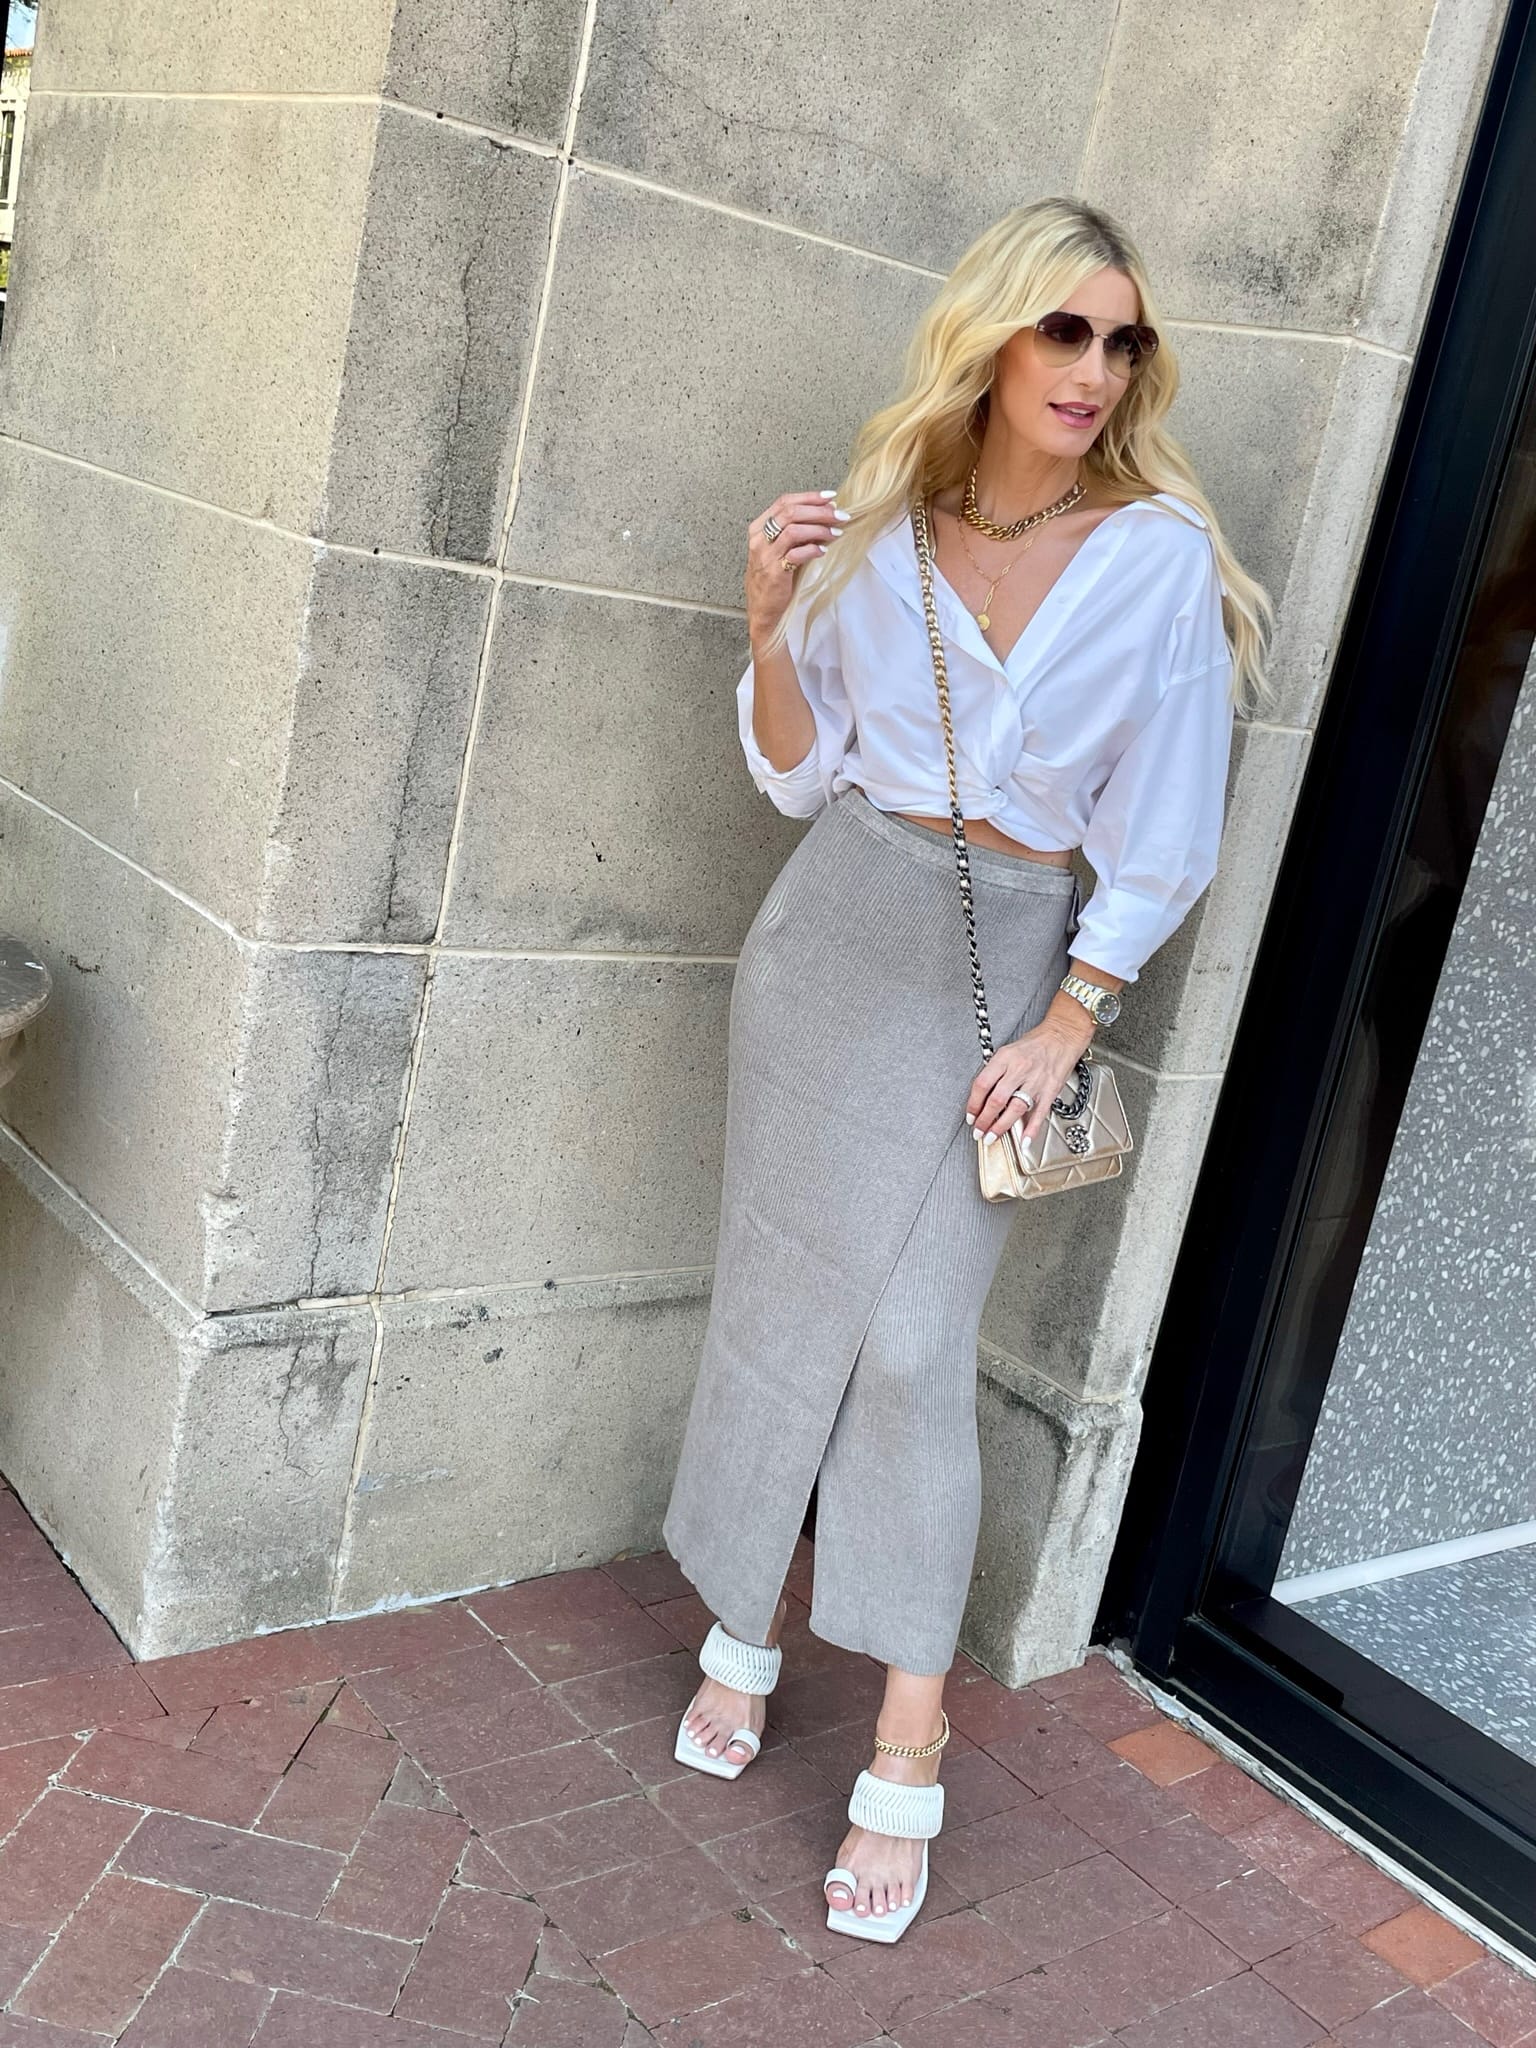 Dallas fashion blogger over 40 wearing white button up top with ribbed pencil skirt and white heeled sandals